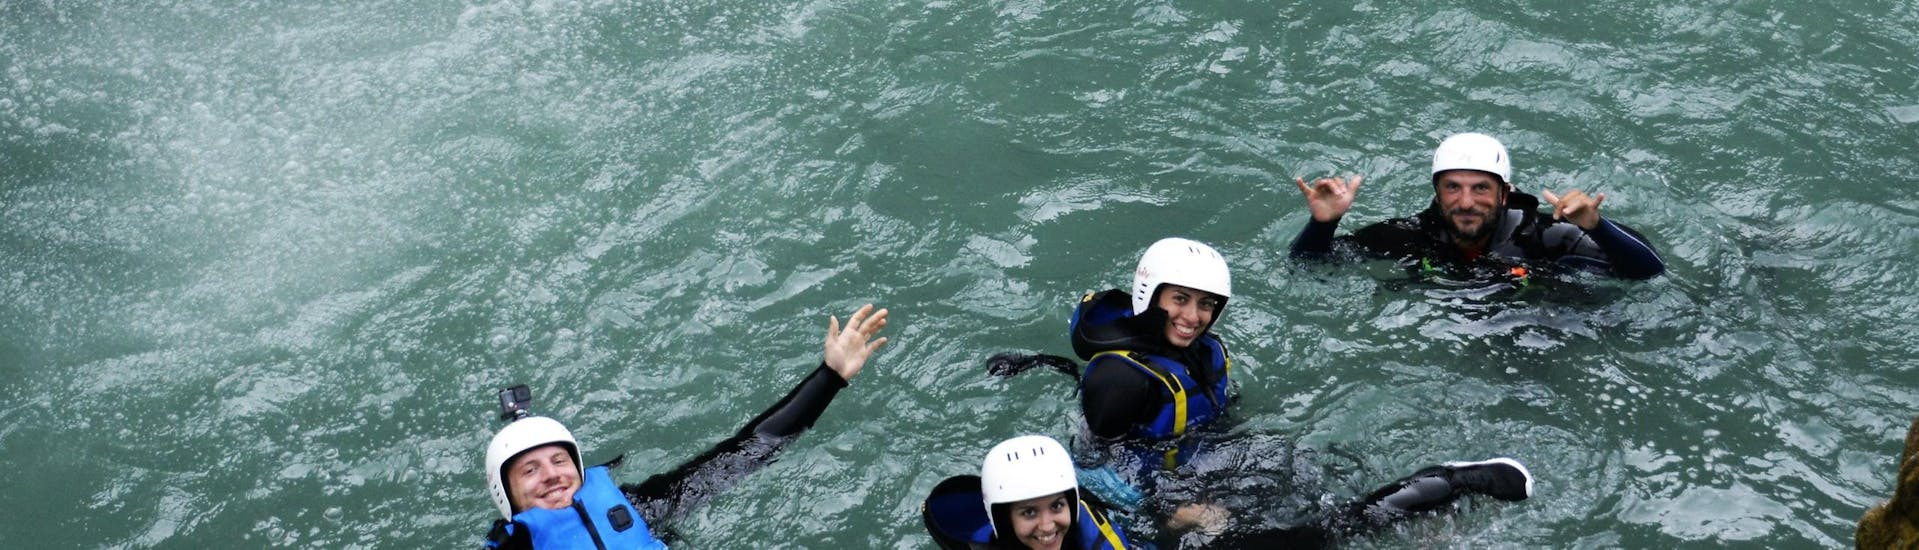 Gevorderde Canyoning in Balmuccia - Sesia.